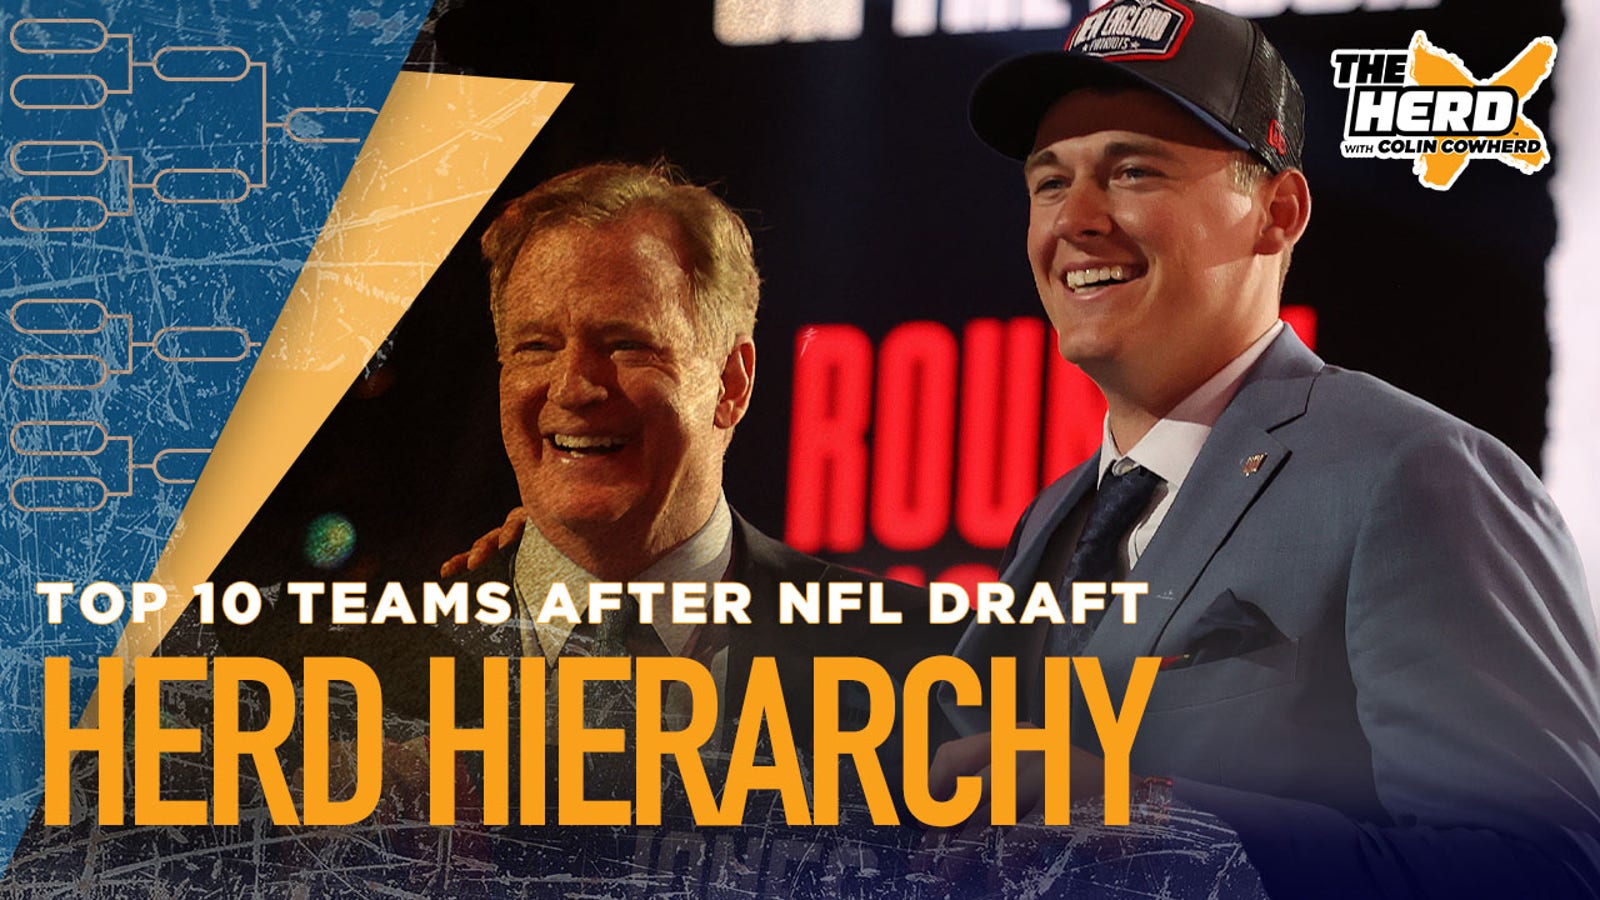 Herd Hierarchy: Colin Cowherd ranks his top 10 teams after the NFL Draft | THE HERD